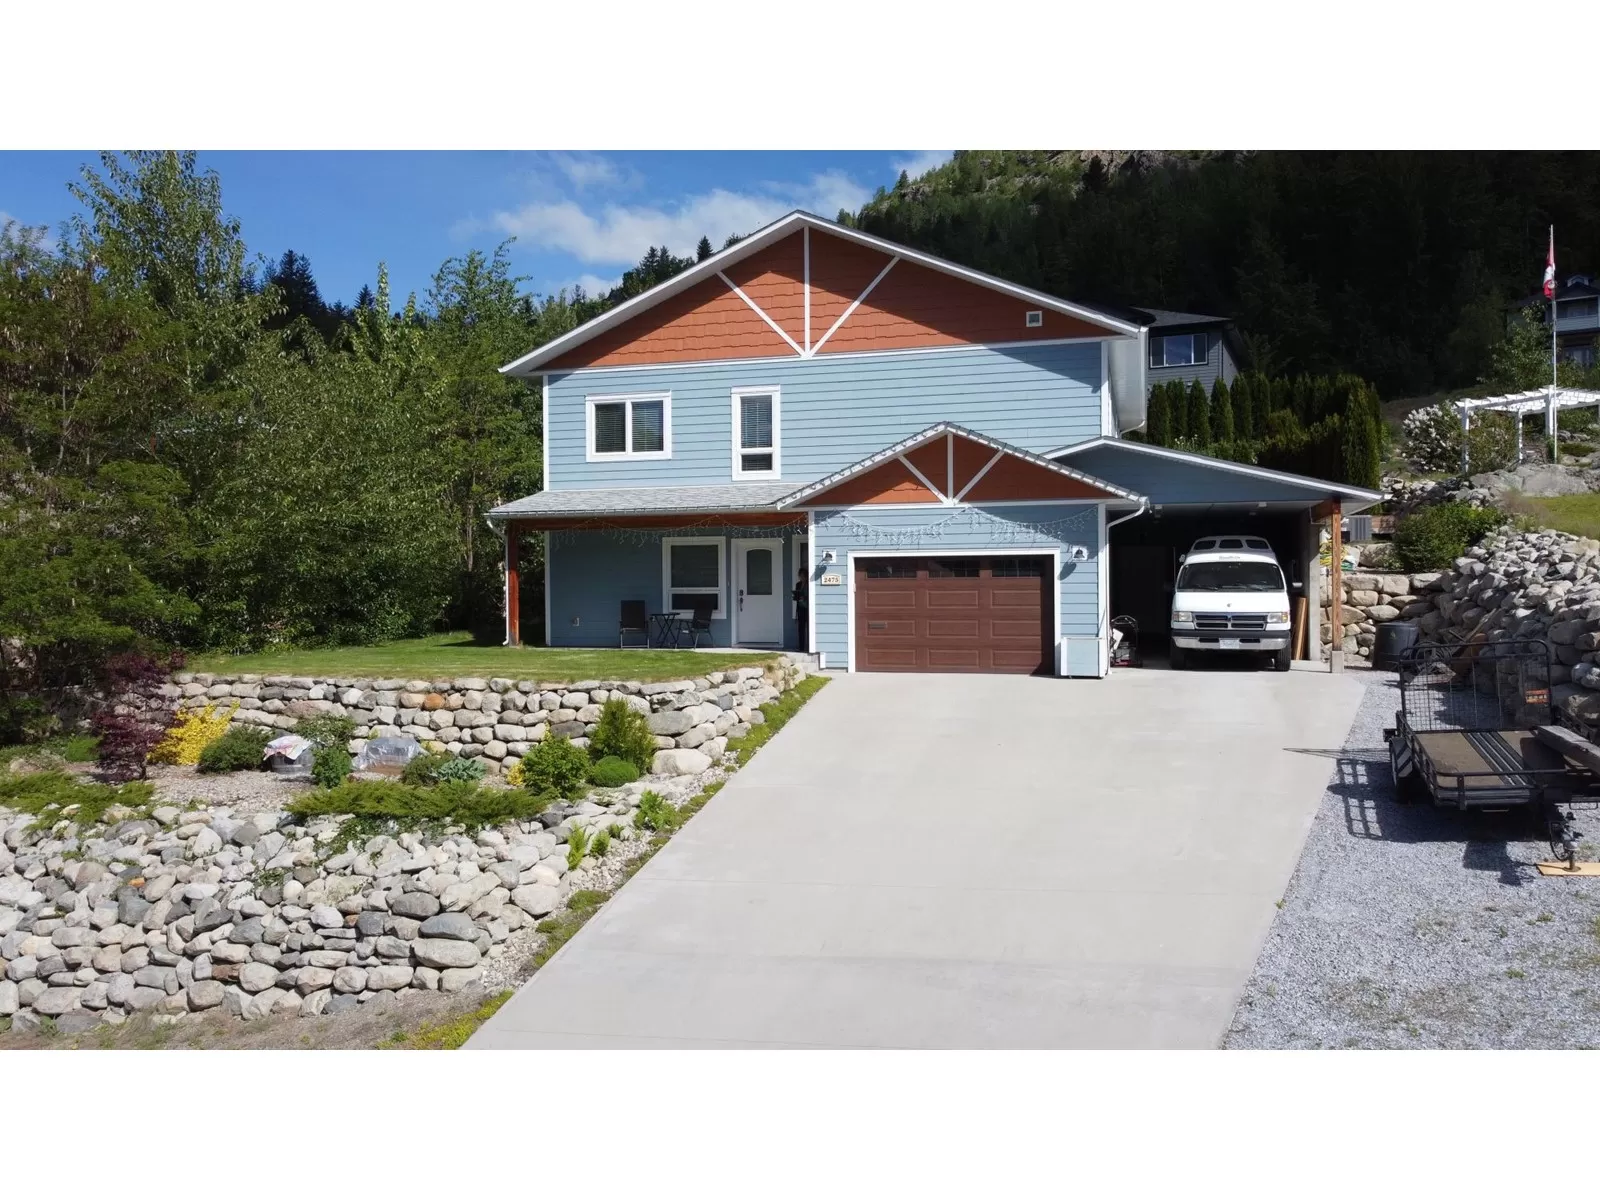 House for rent: 2475 Colin Crescent, Trail, British Columbia V1R 4T4